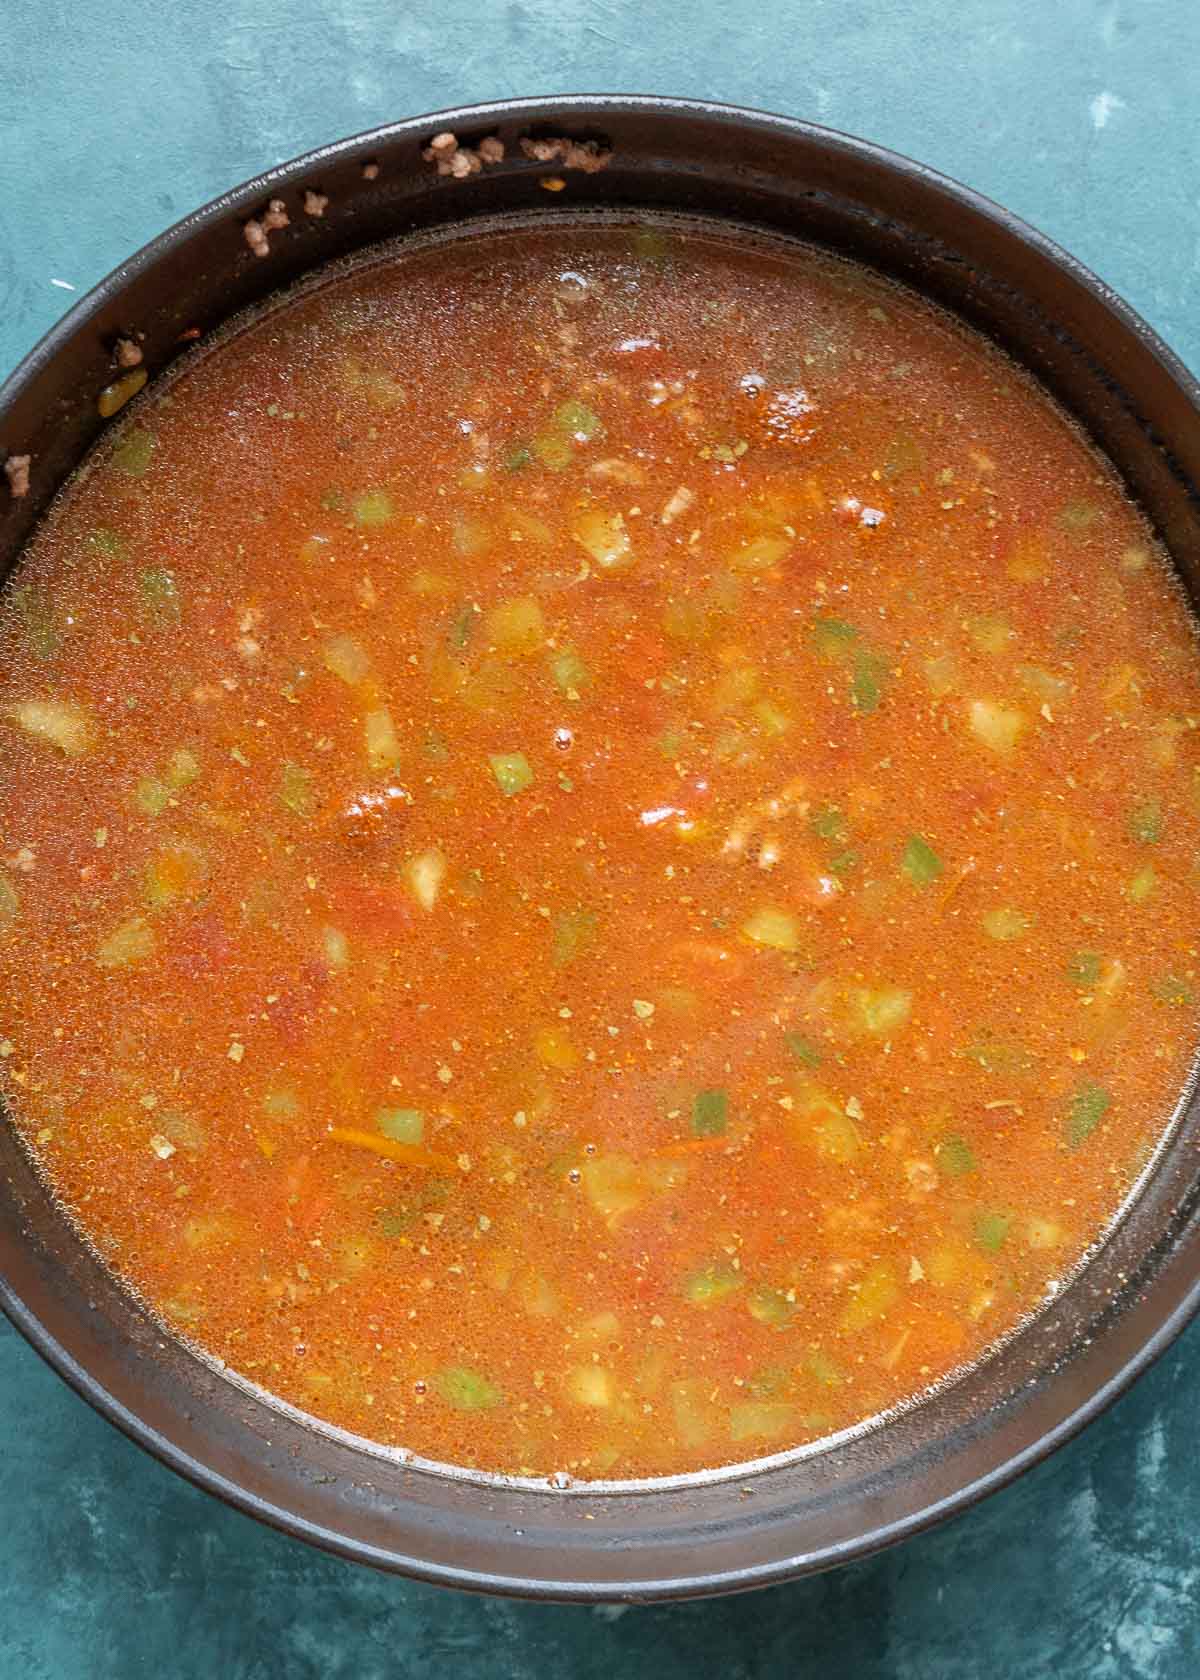 dutch oven two-thirds filled with beef broth, ground beef, tomatoes, tomato paste, green chilies, peppers, and seasonings